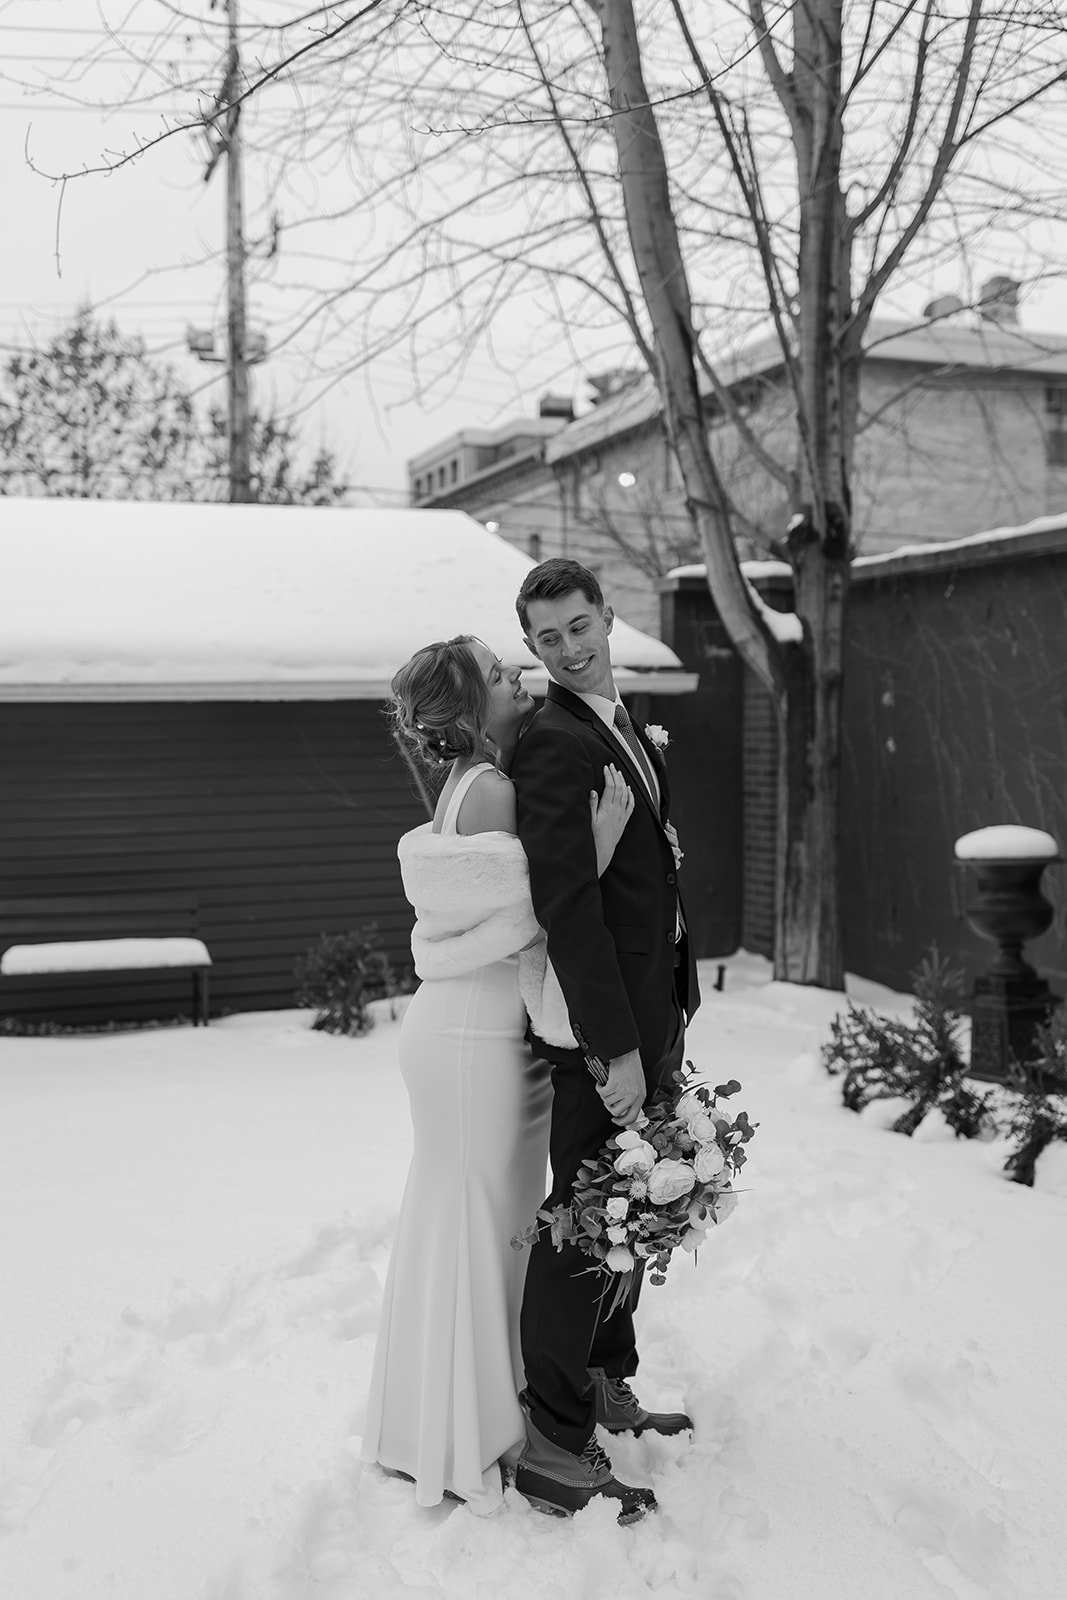 Bride and groom outside in the snow